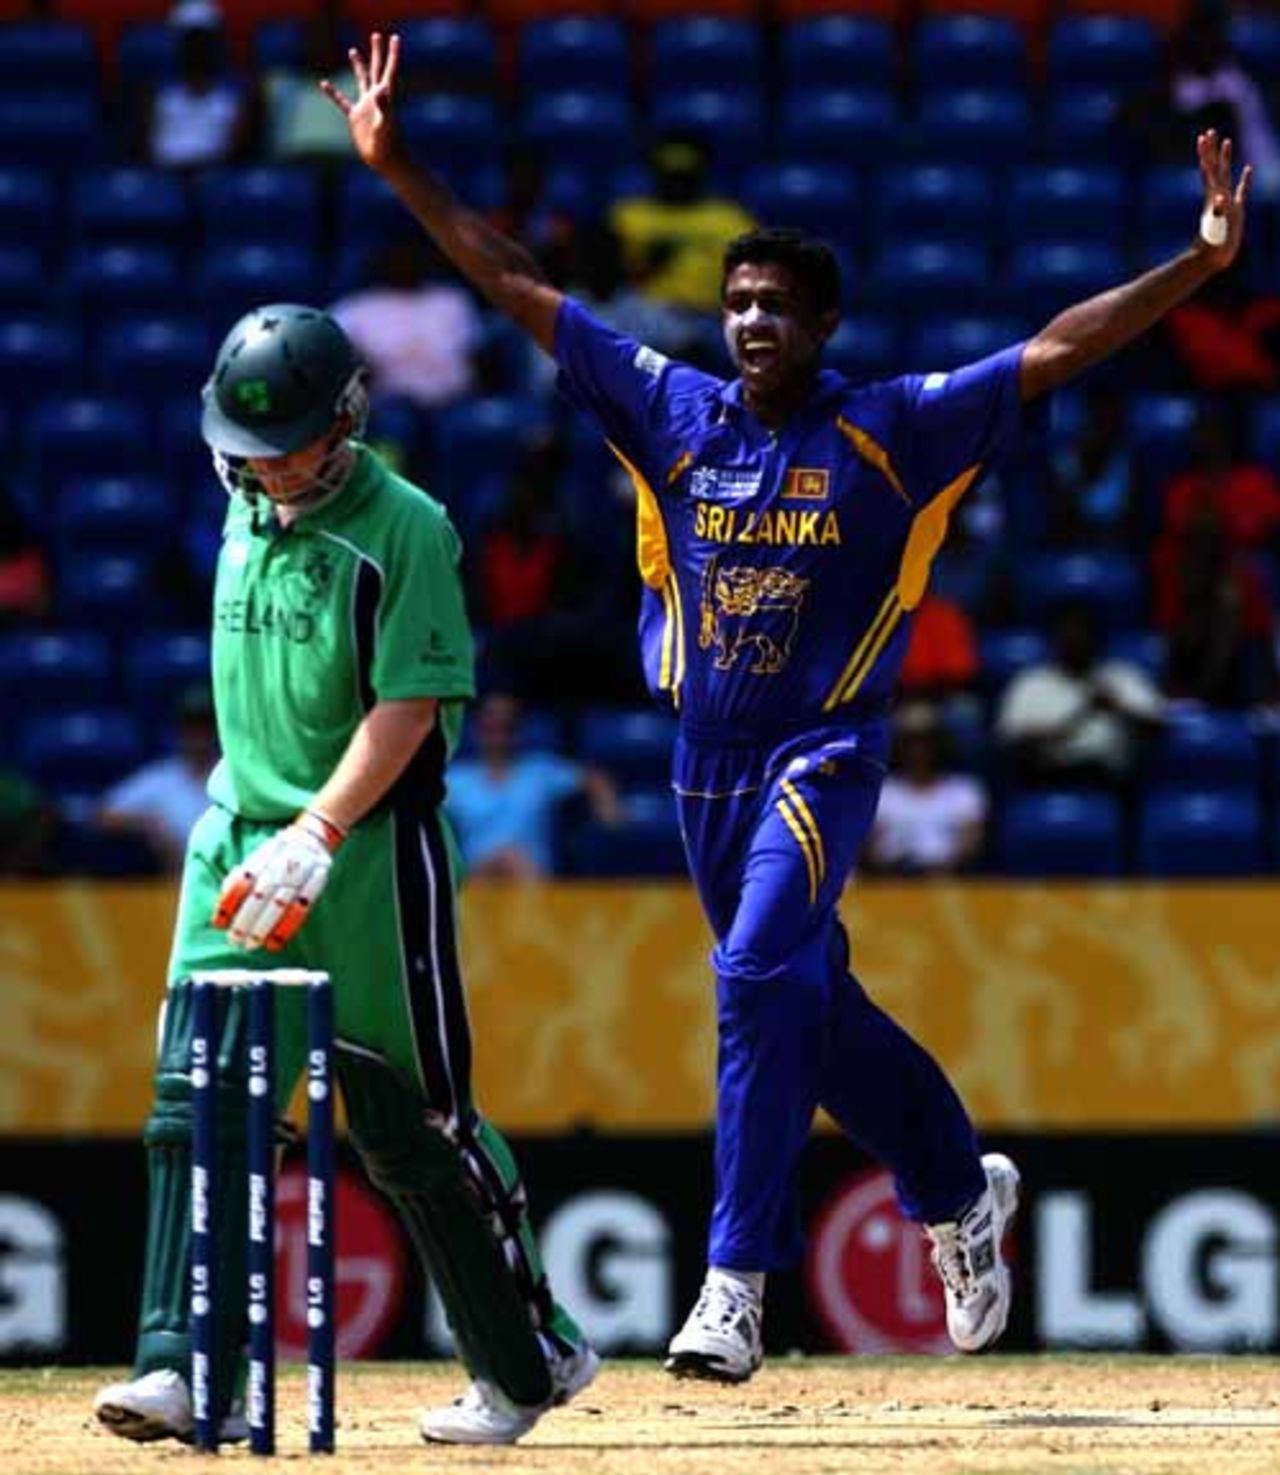 Farveez Maharoof celebrates the wicket of Eoin Morgan who was out for a duck, Ireland v Sri Lanka, Super Eights, National Stadium, Grenada, April 18, 2007